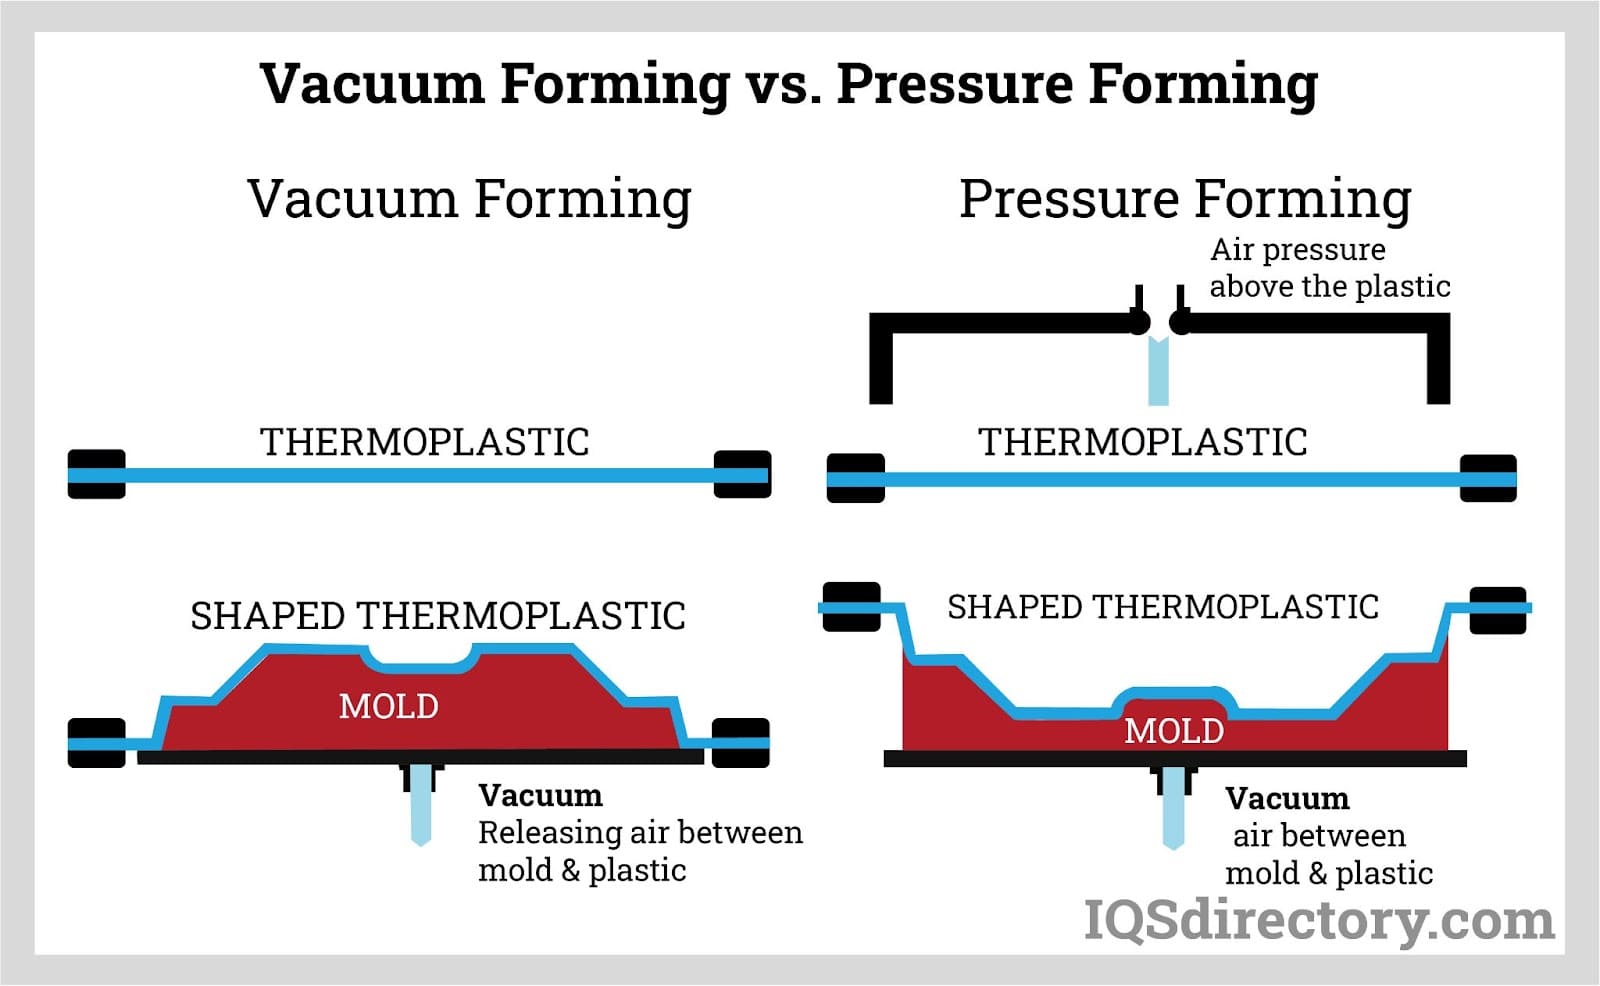 Vacuum Forming Types Uses Features And Benefits